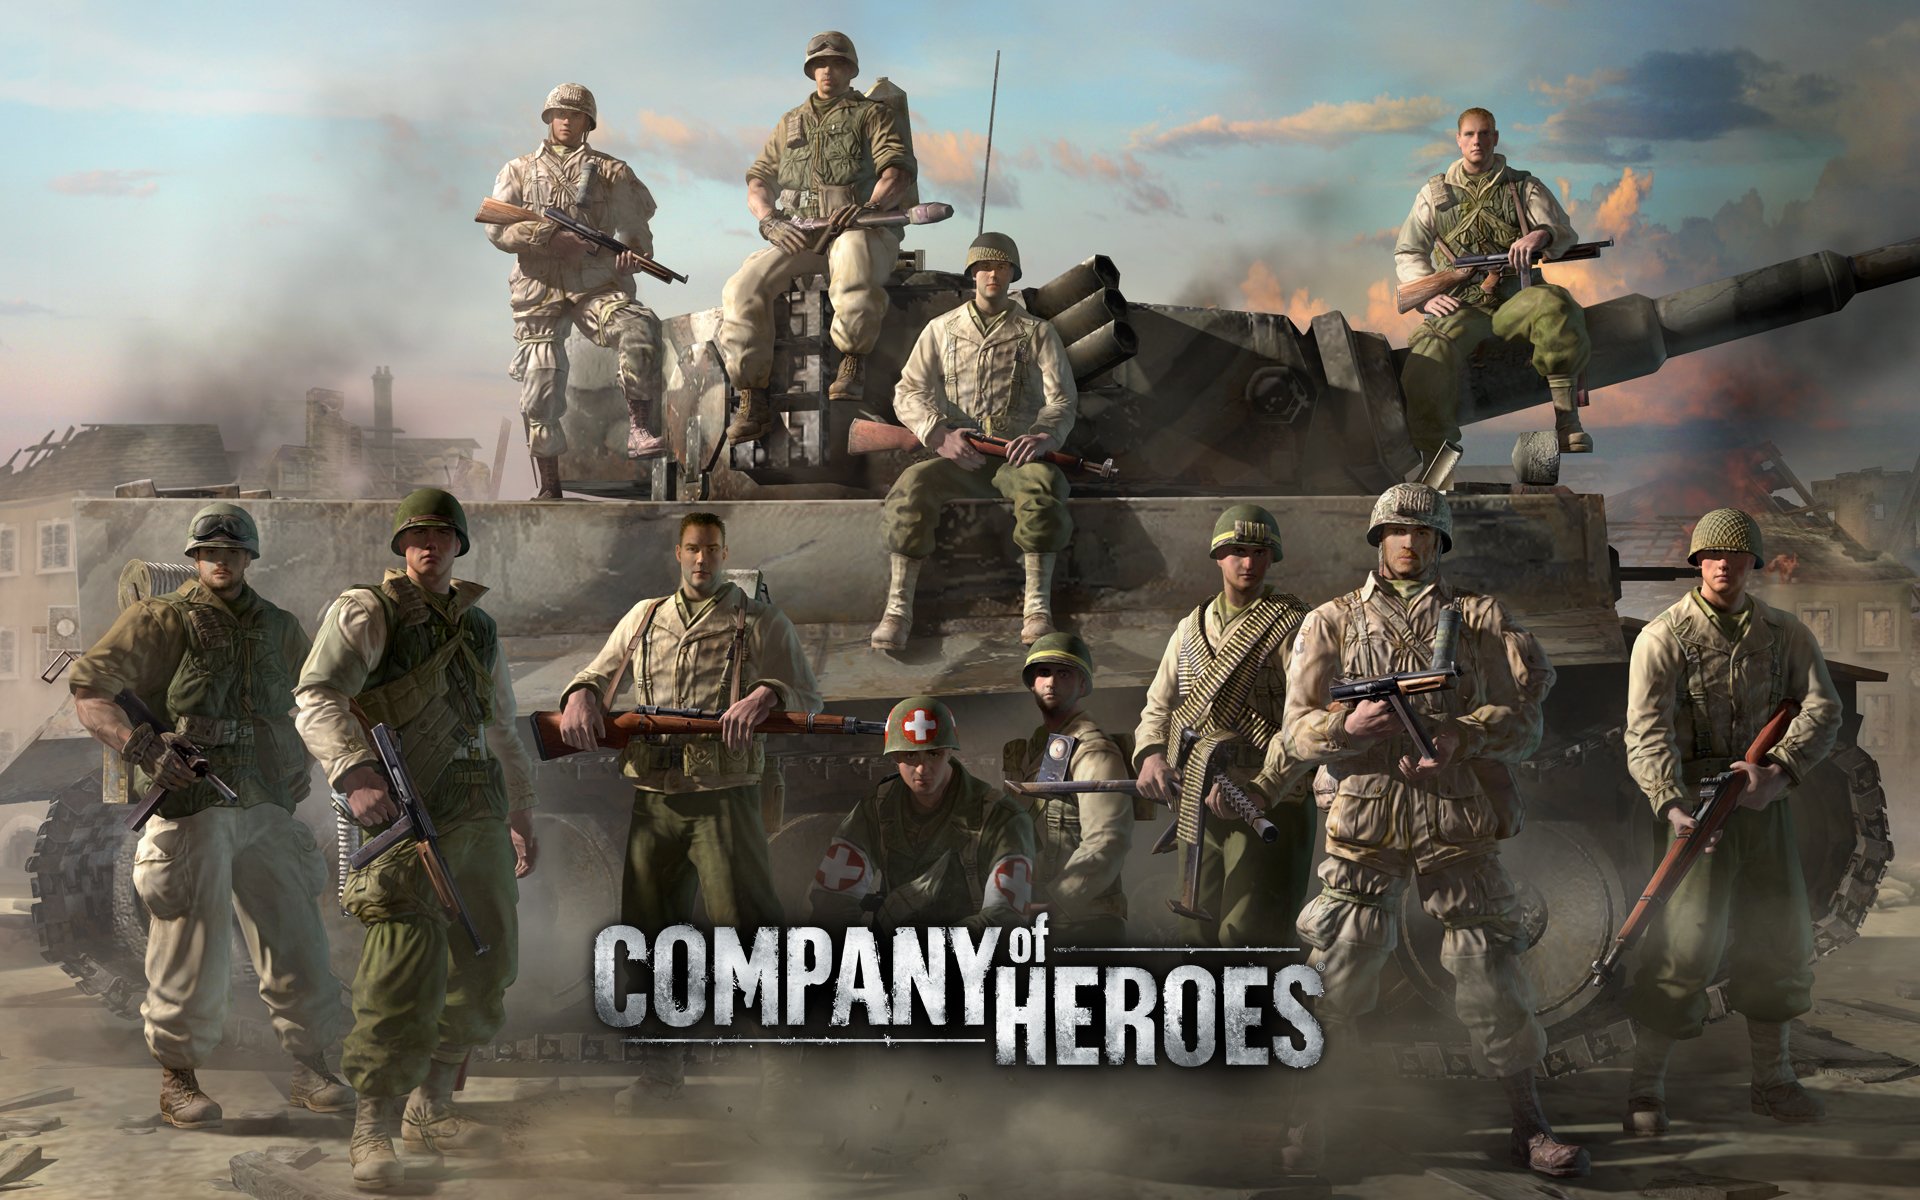 company of heroes, Strategy, Mmo, Onlime, Military, War, Shooter, Action, Company, Heroes, Battle,  67 Wallpaper